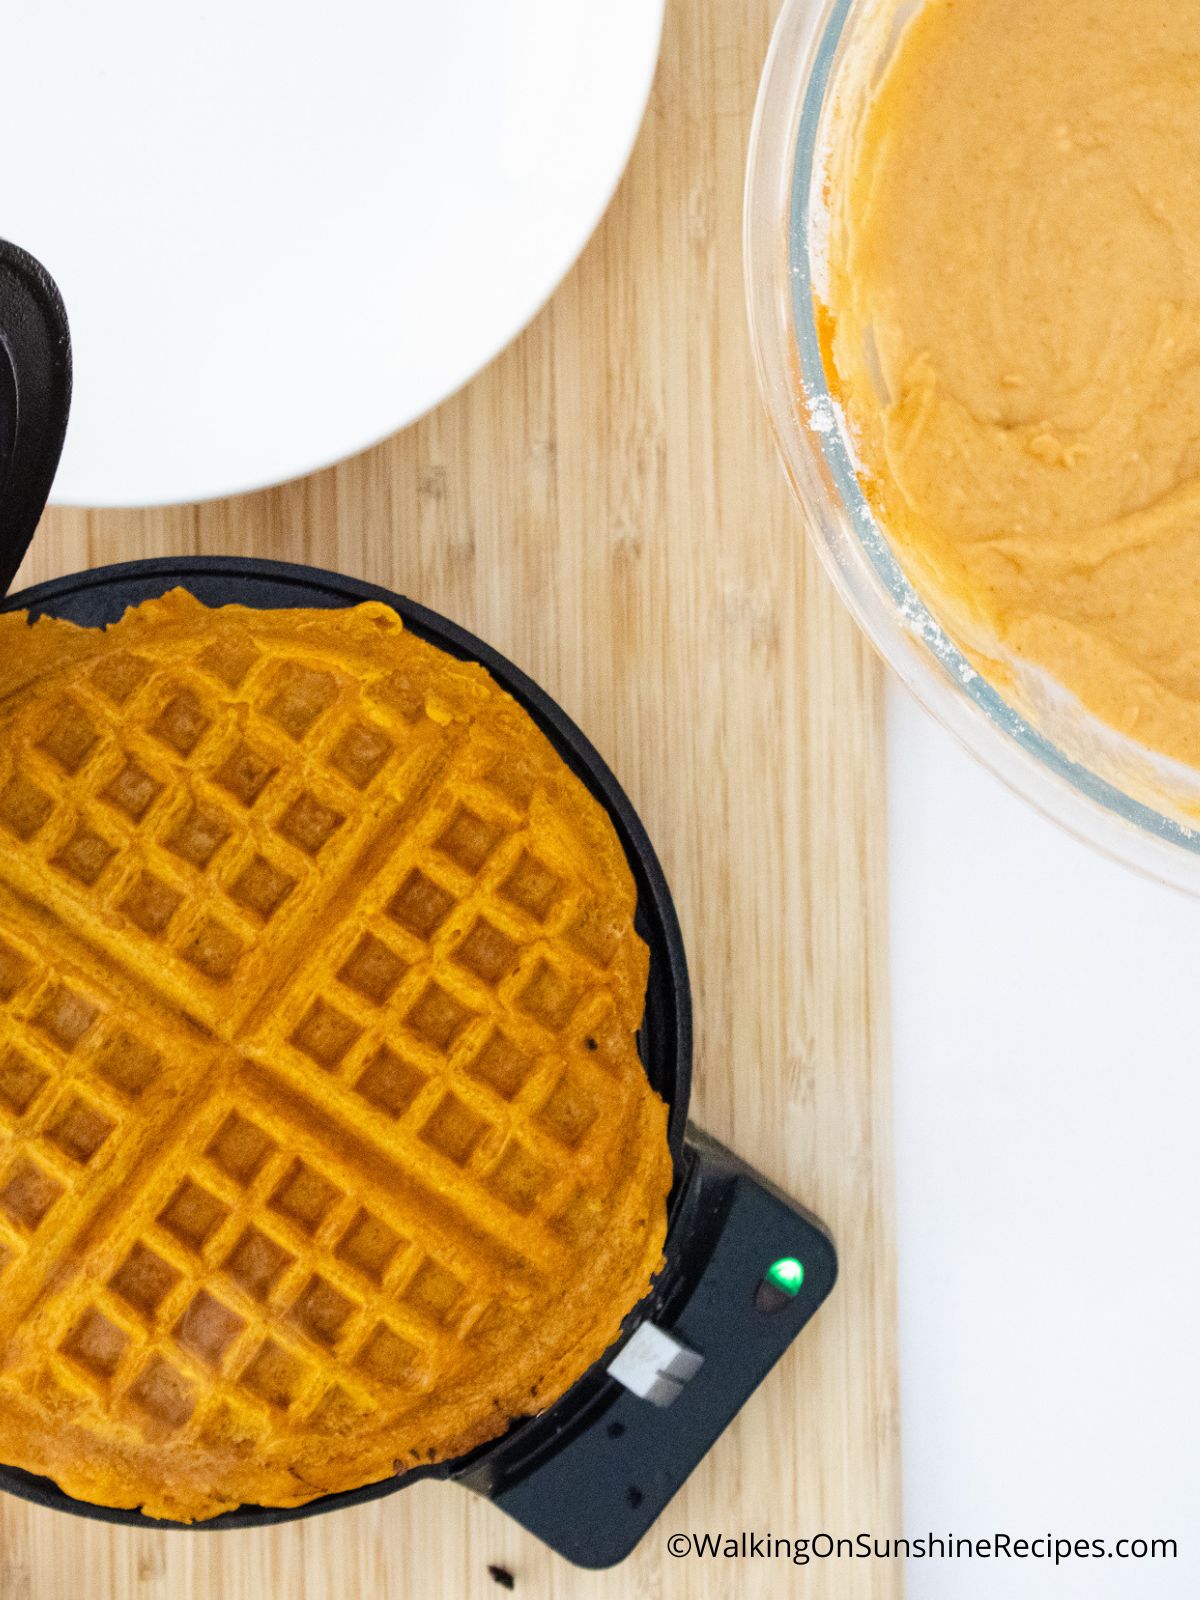 Baked waffle in an opened waffle maker